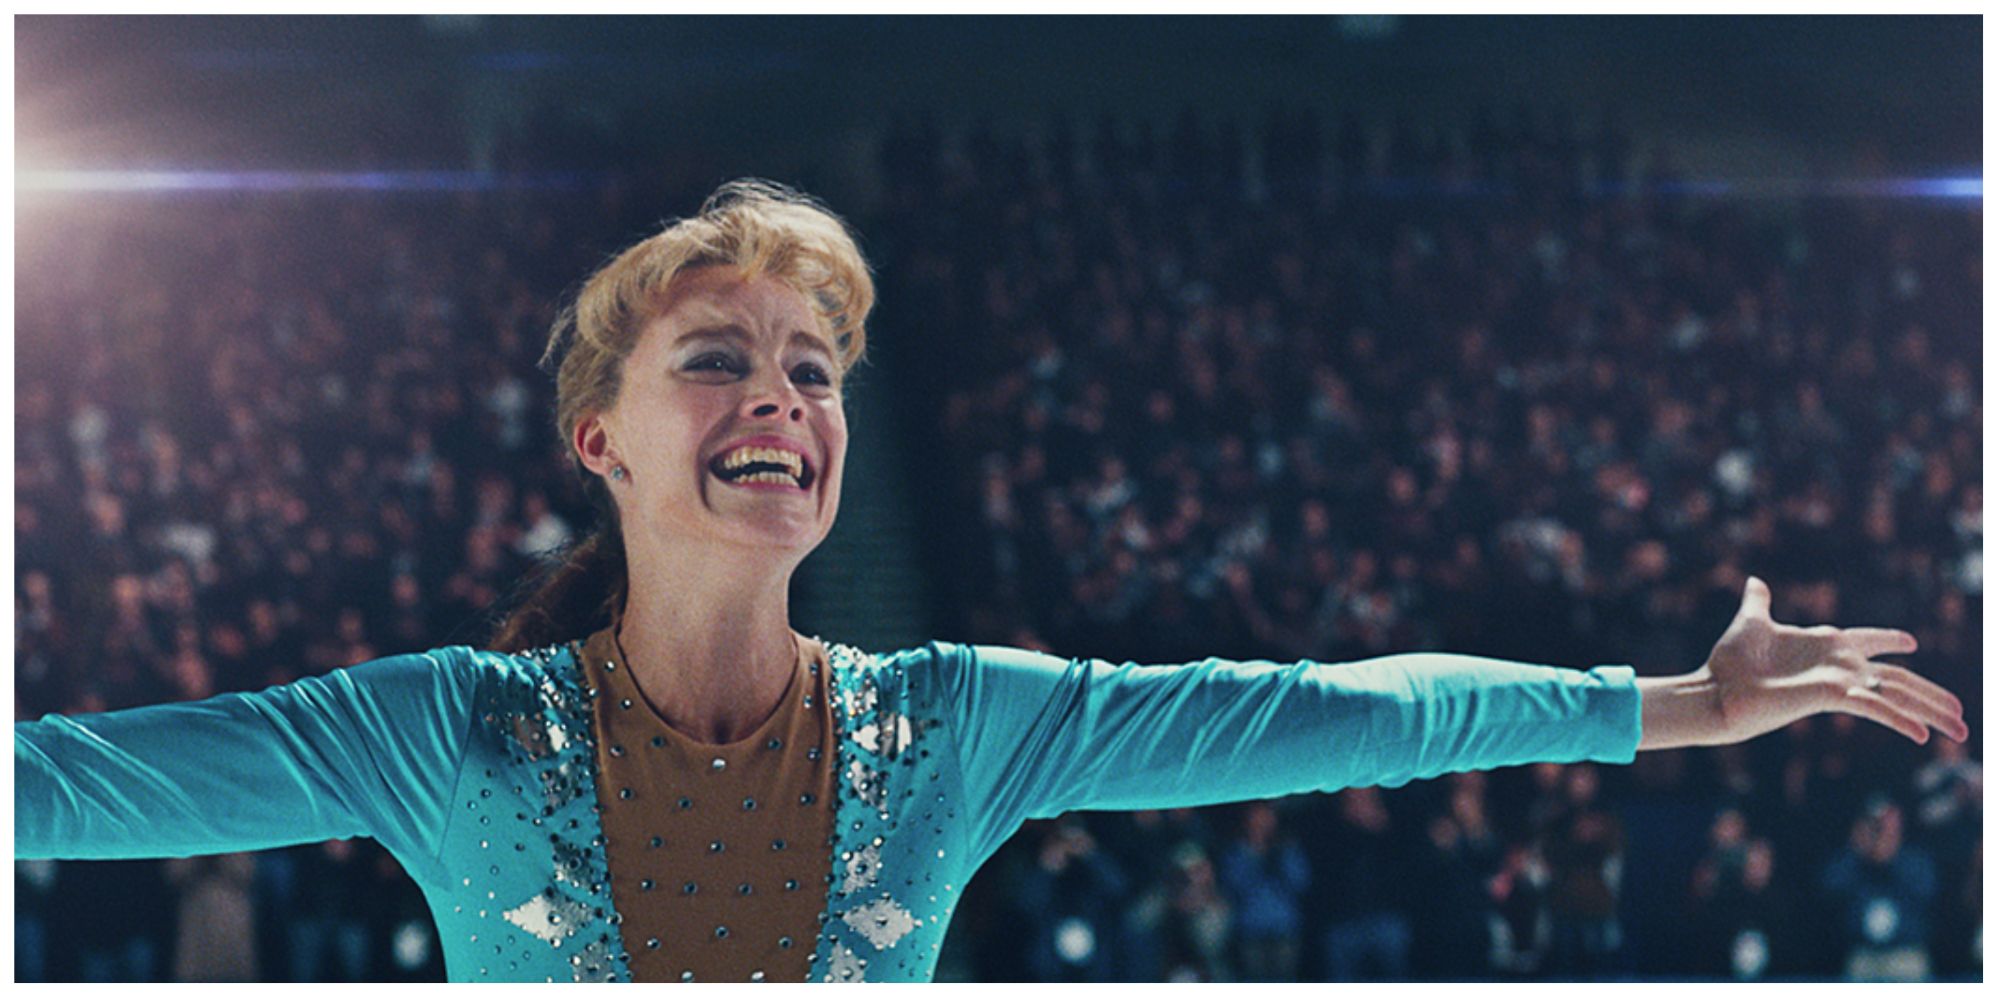 Margot Robbie as Tonya on the ice rink holding her arms up in celebration to the crowd